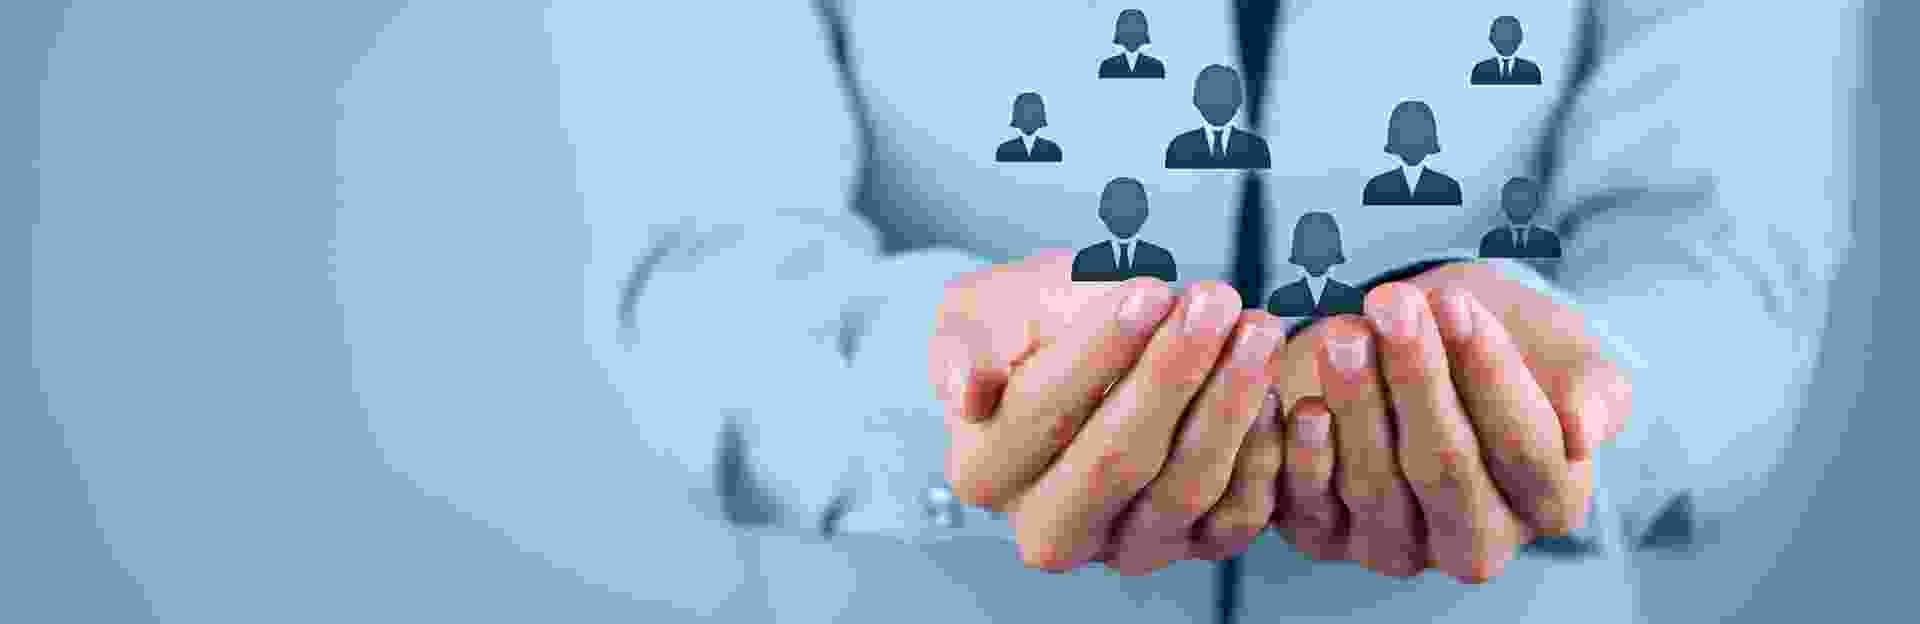 Hands of a care manager holding people icons